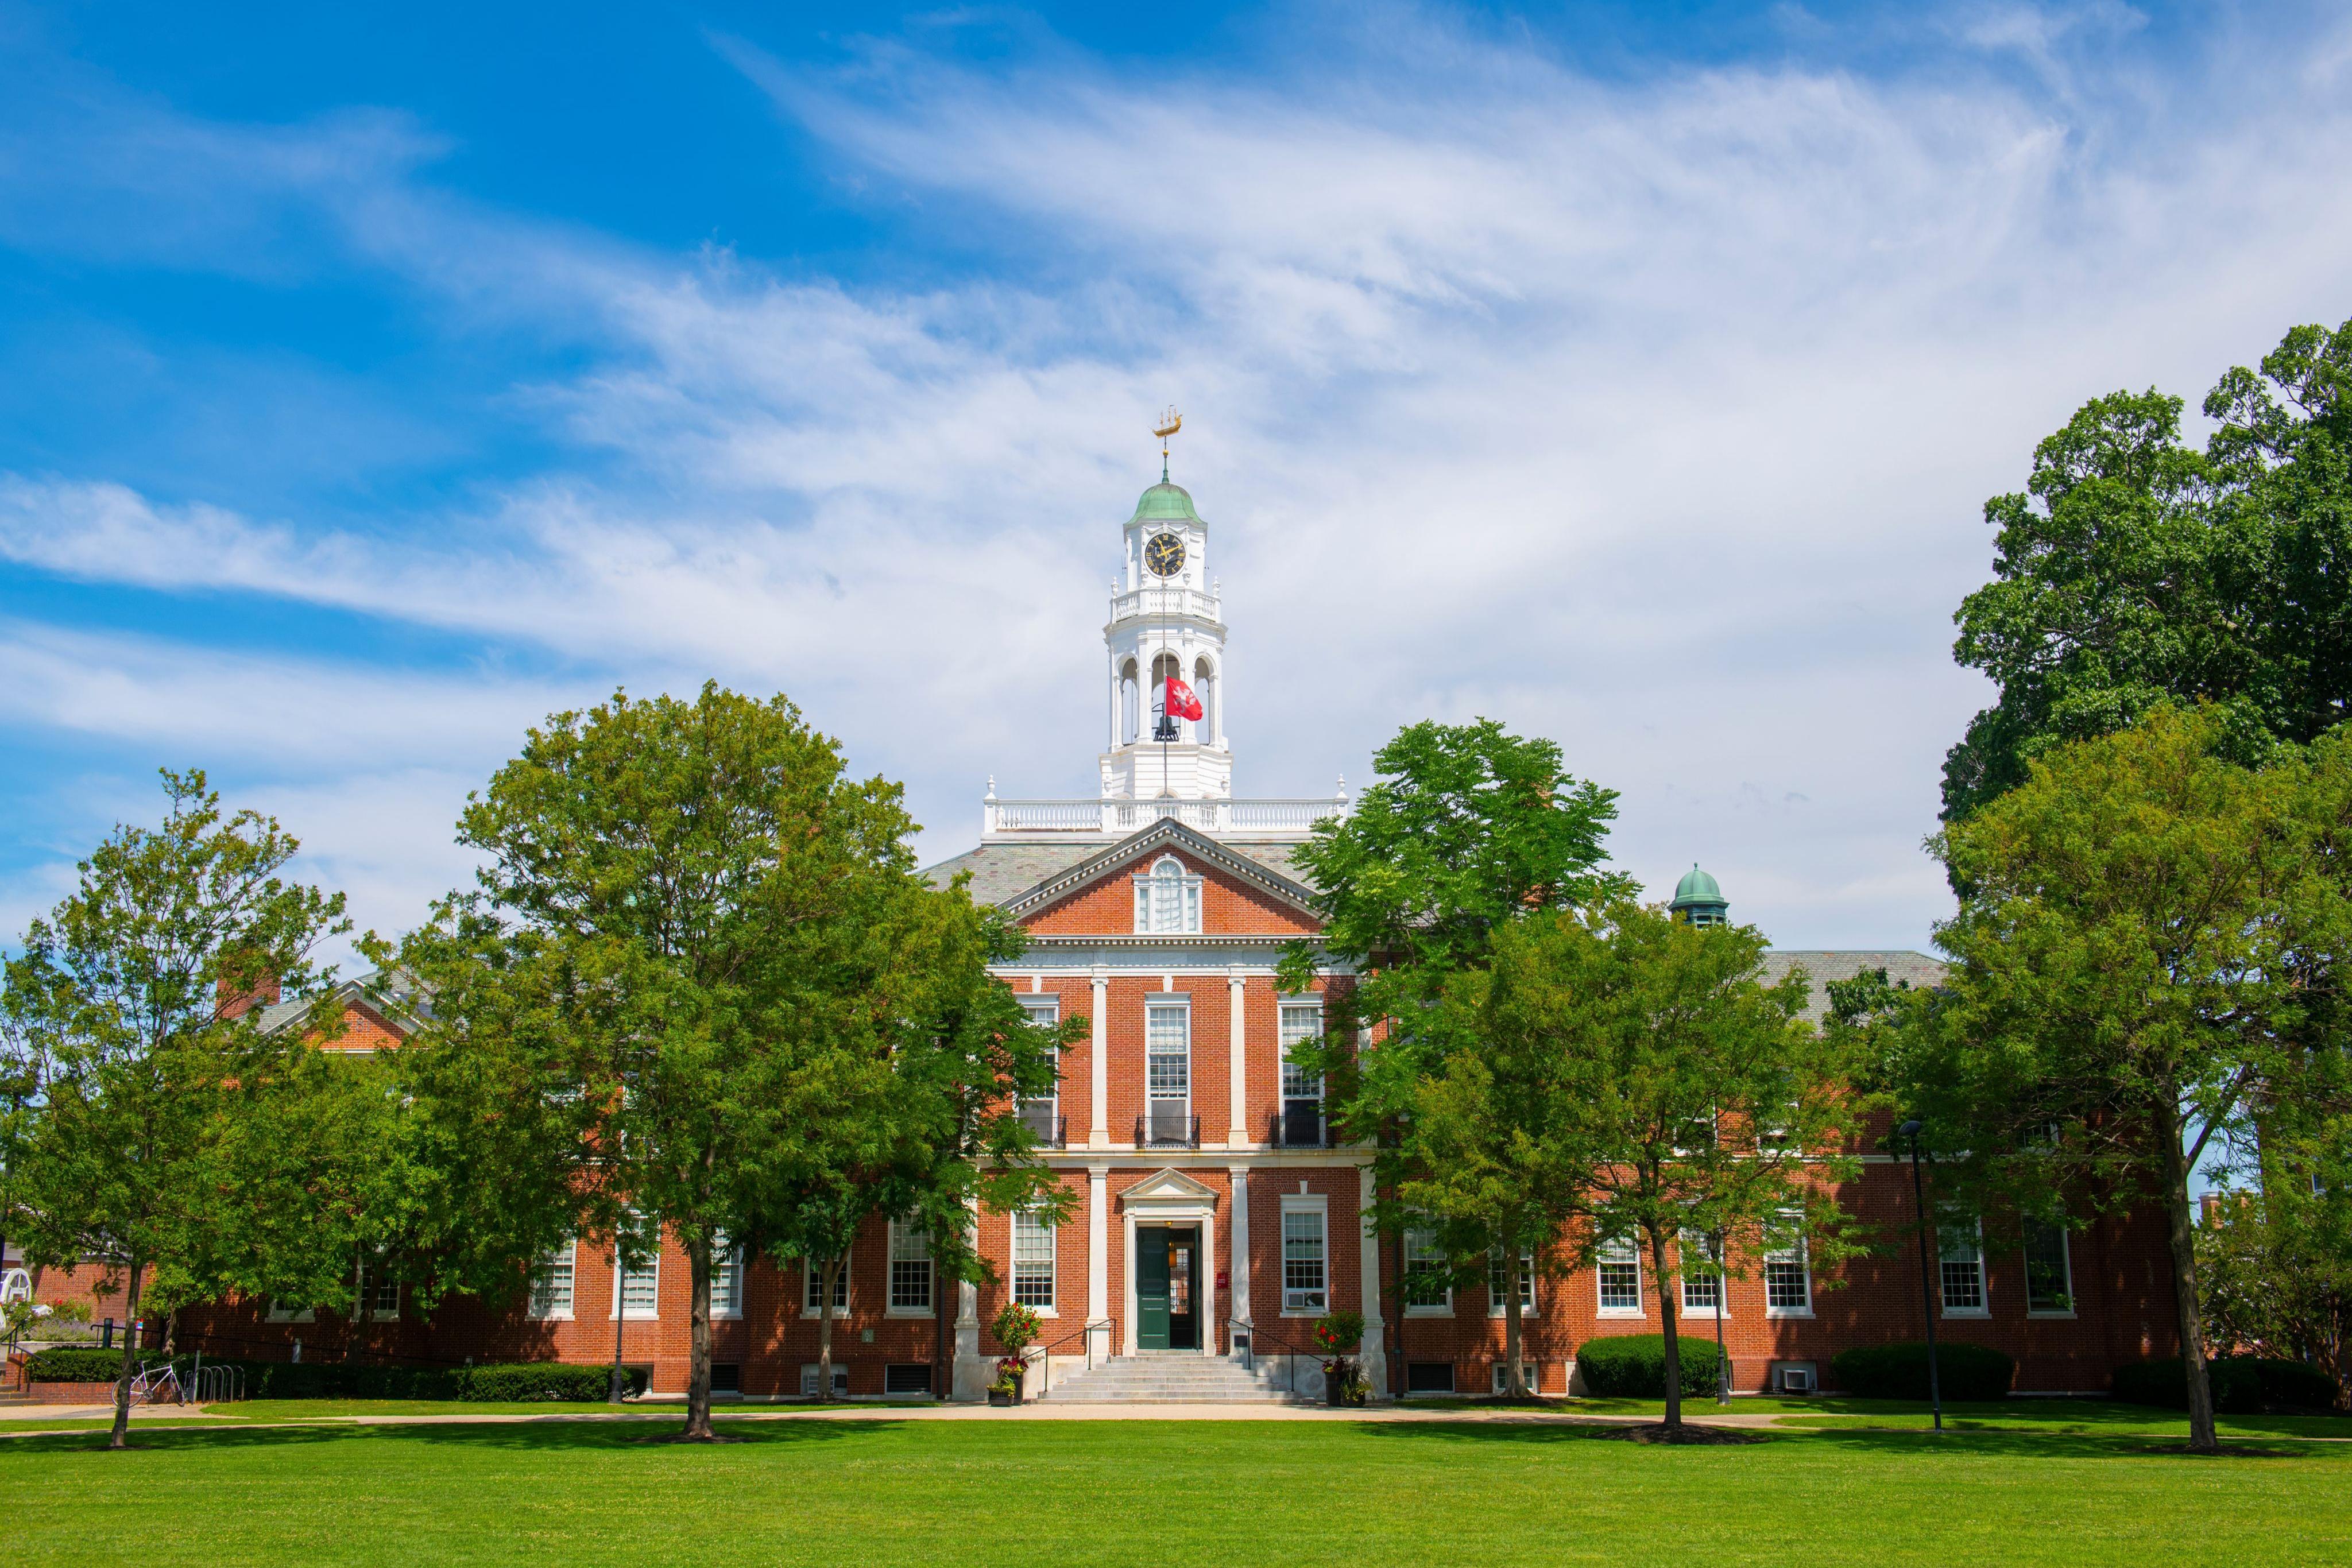 Academy Building of Phillips Exeter Academy in Exeter, New Hampshire.